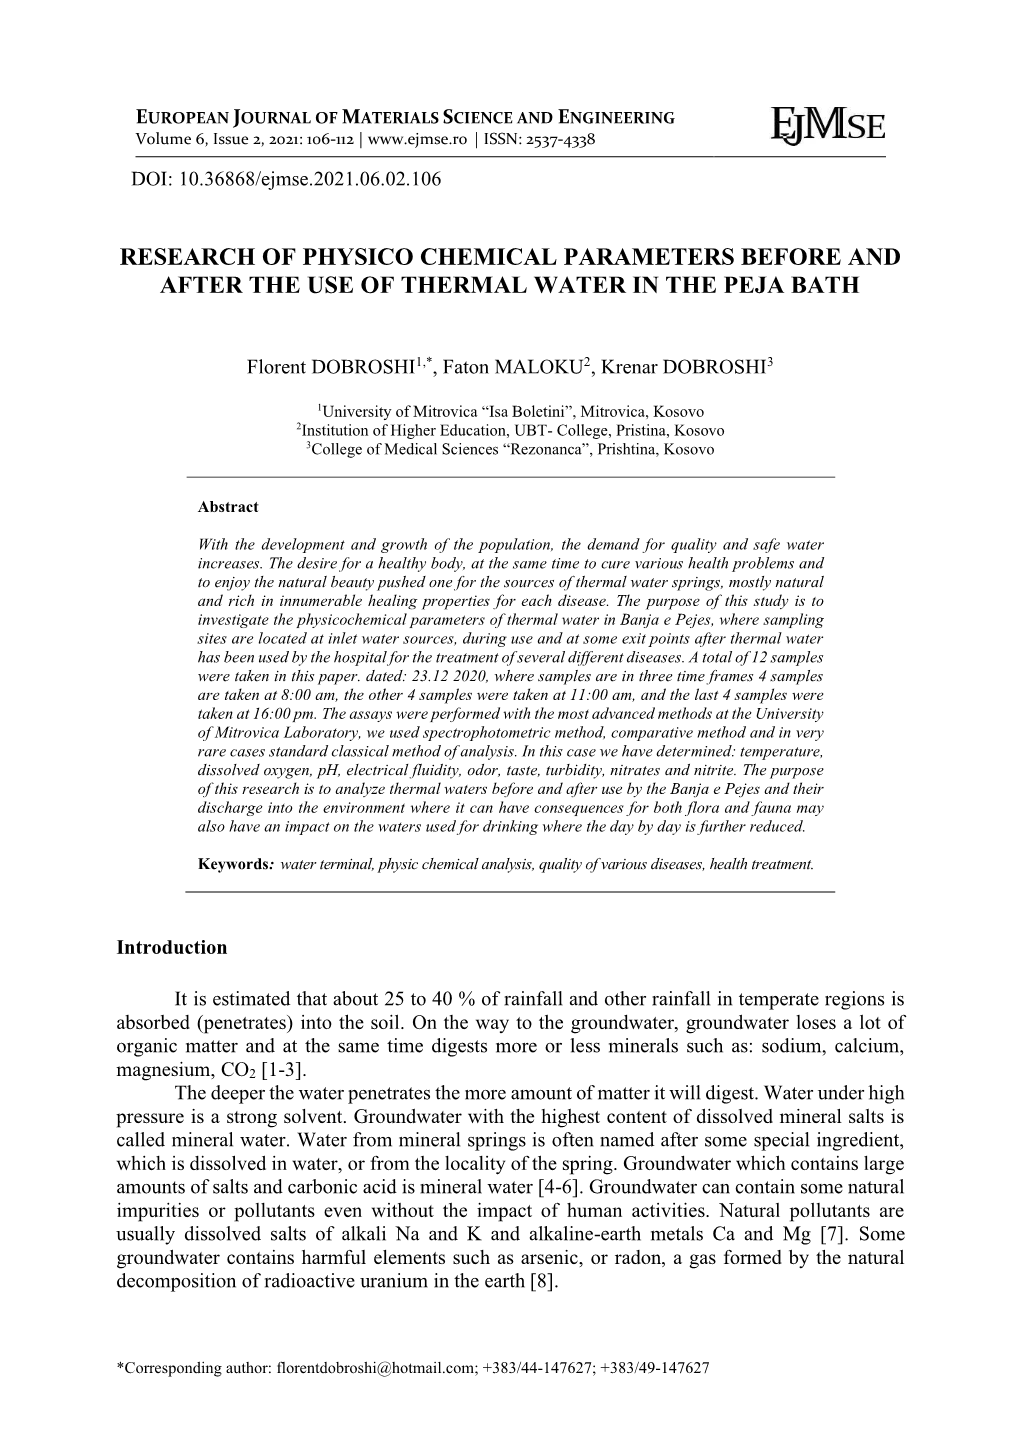 Research of Physico Chemical Parameters Before and After the Use of Thermal Water in the Peja Bath